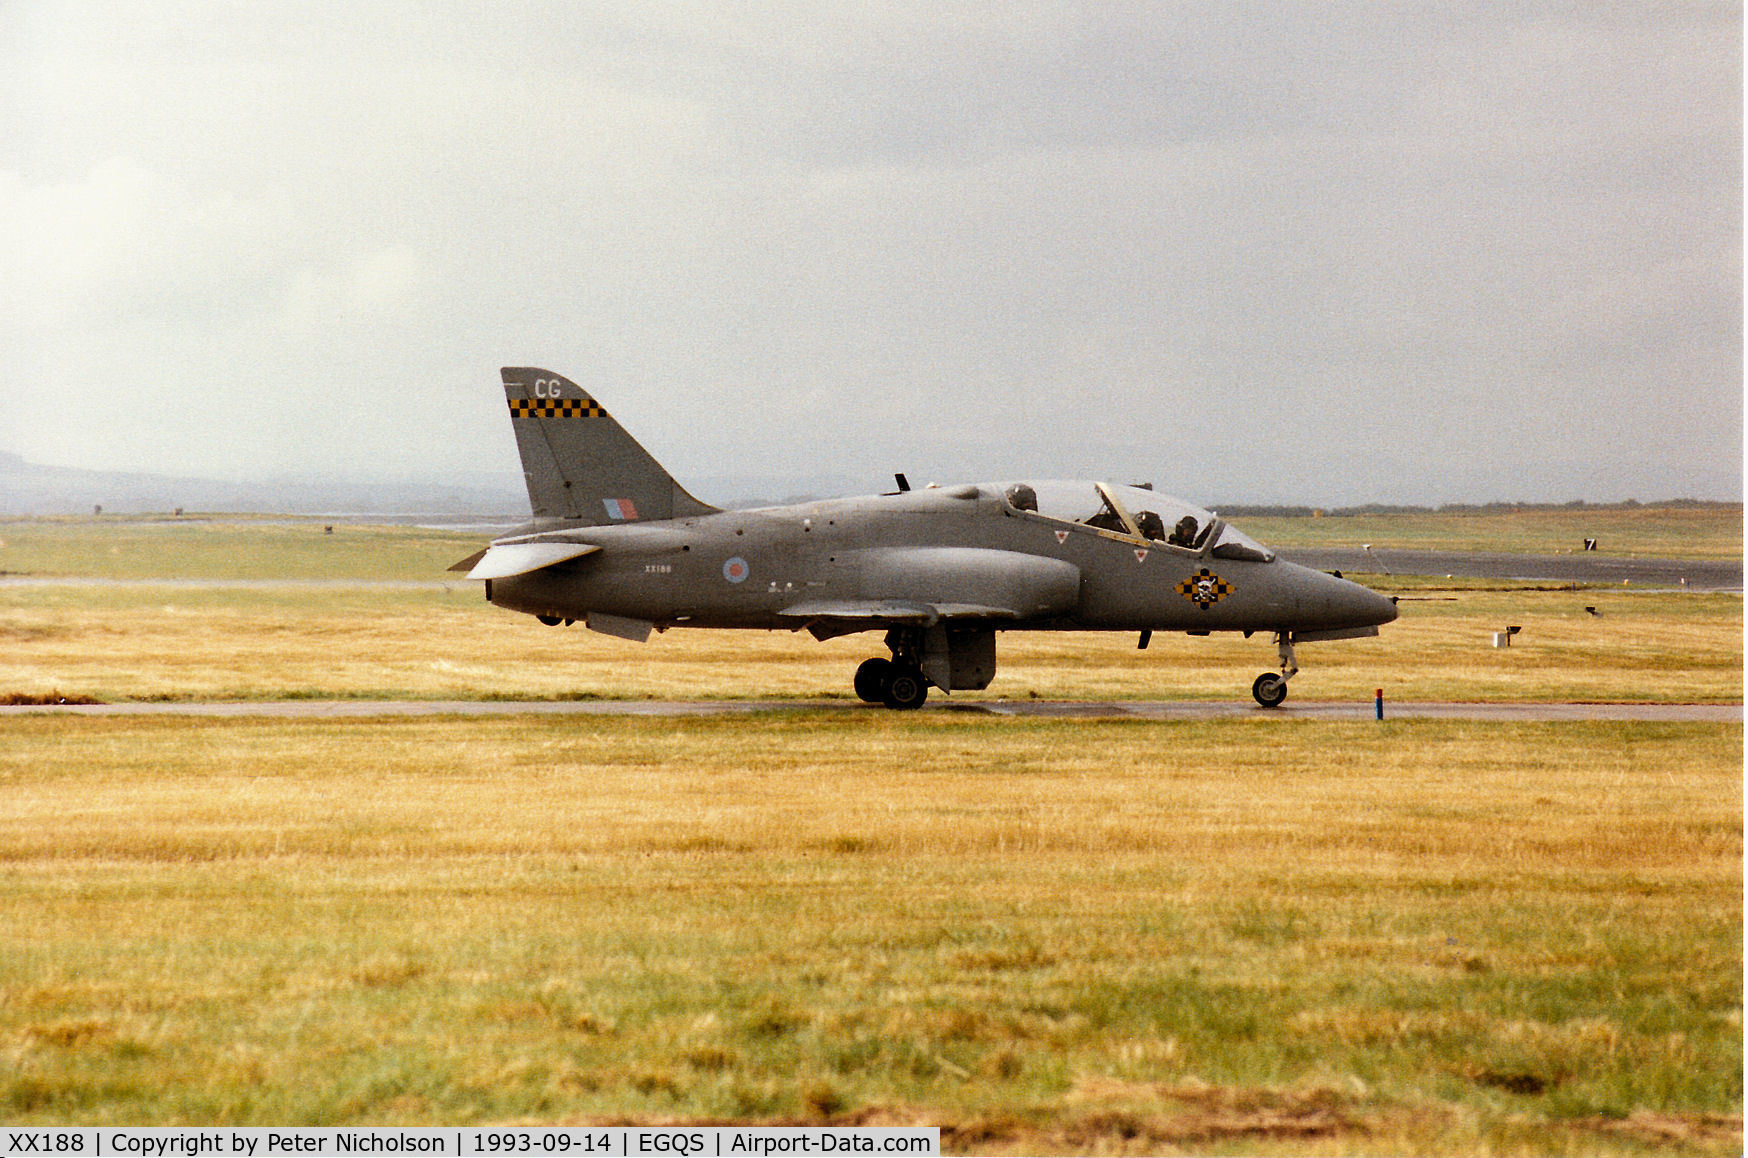 XX188, 1977 Hawker Siddeley Hawk T.1A C/N 035/312035, Hawk T.1A of 100 Squadron at RAF Leeming preparing to join Runway 23 at RAF Lossiemouth in September 1993 on an Exercise Solid Stance mission.